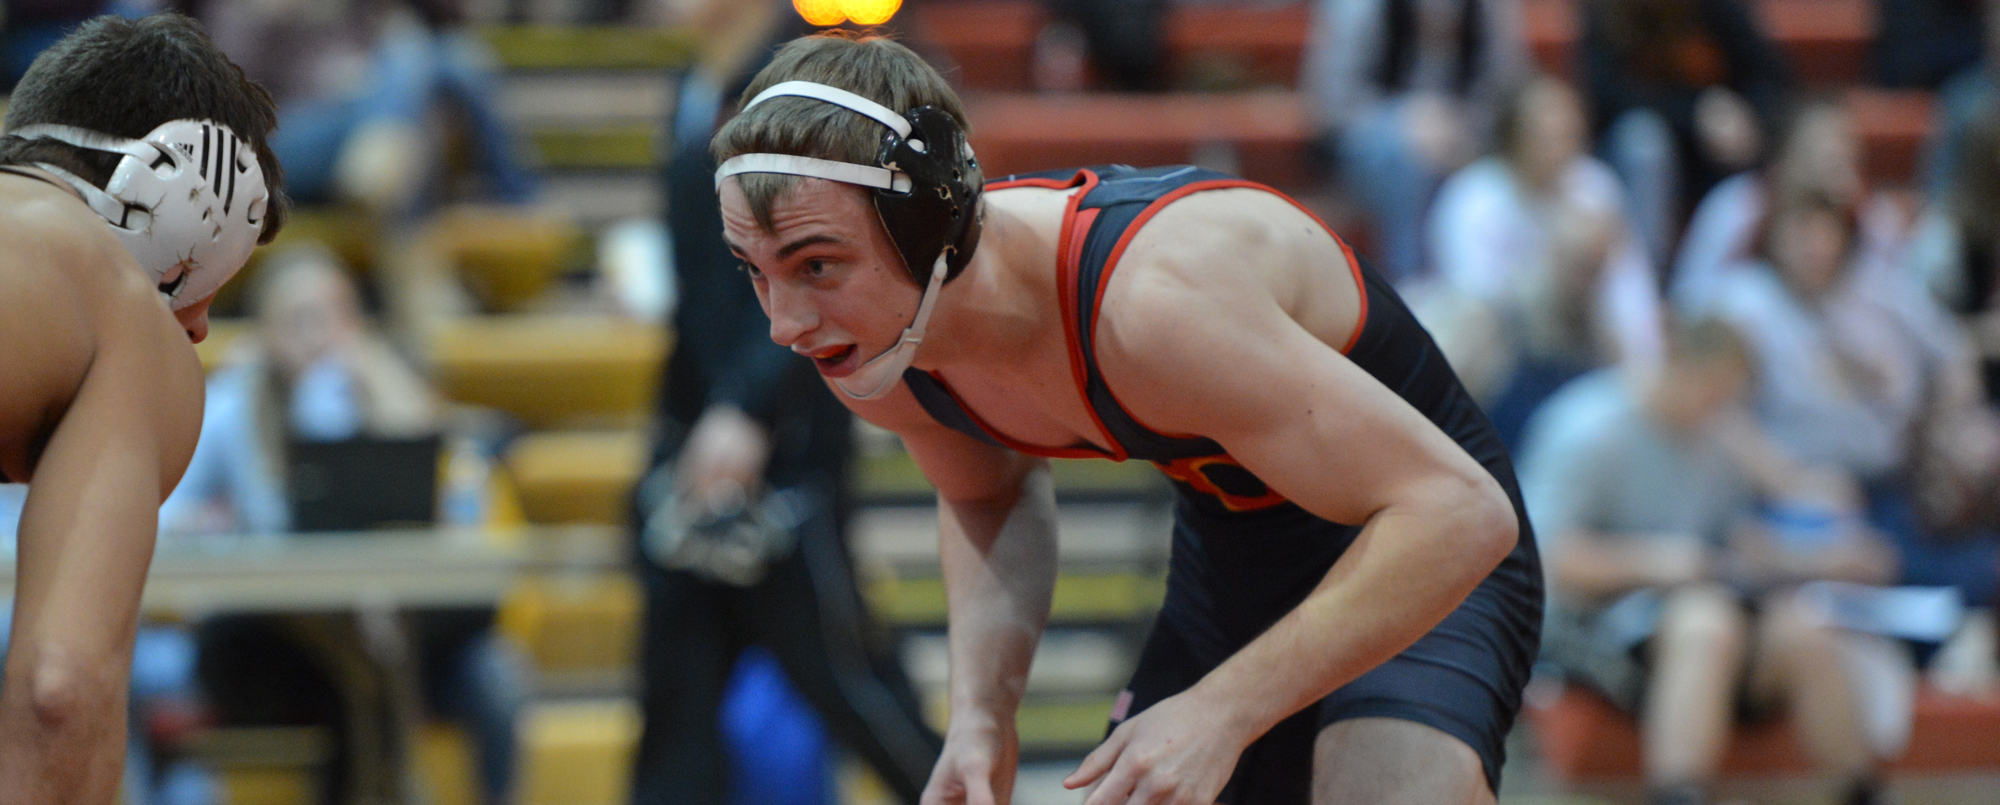 Jason Kiehne went 4-0 to lead the Storm to a 1-3 mark at the IIAC Duals on Saturday, Jan. 21.